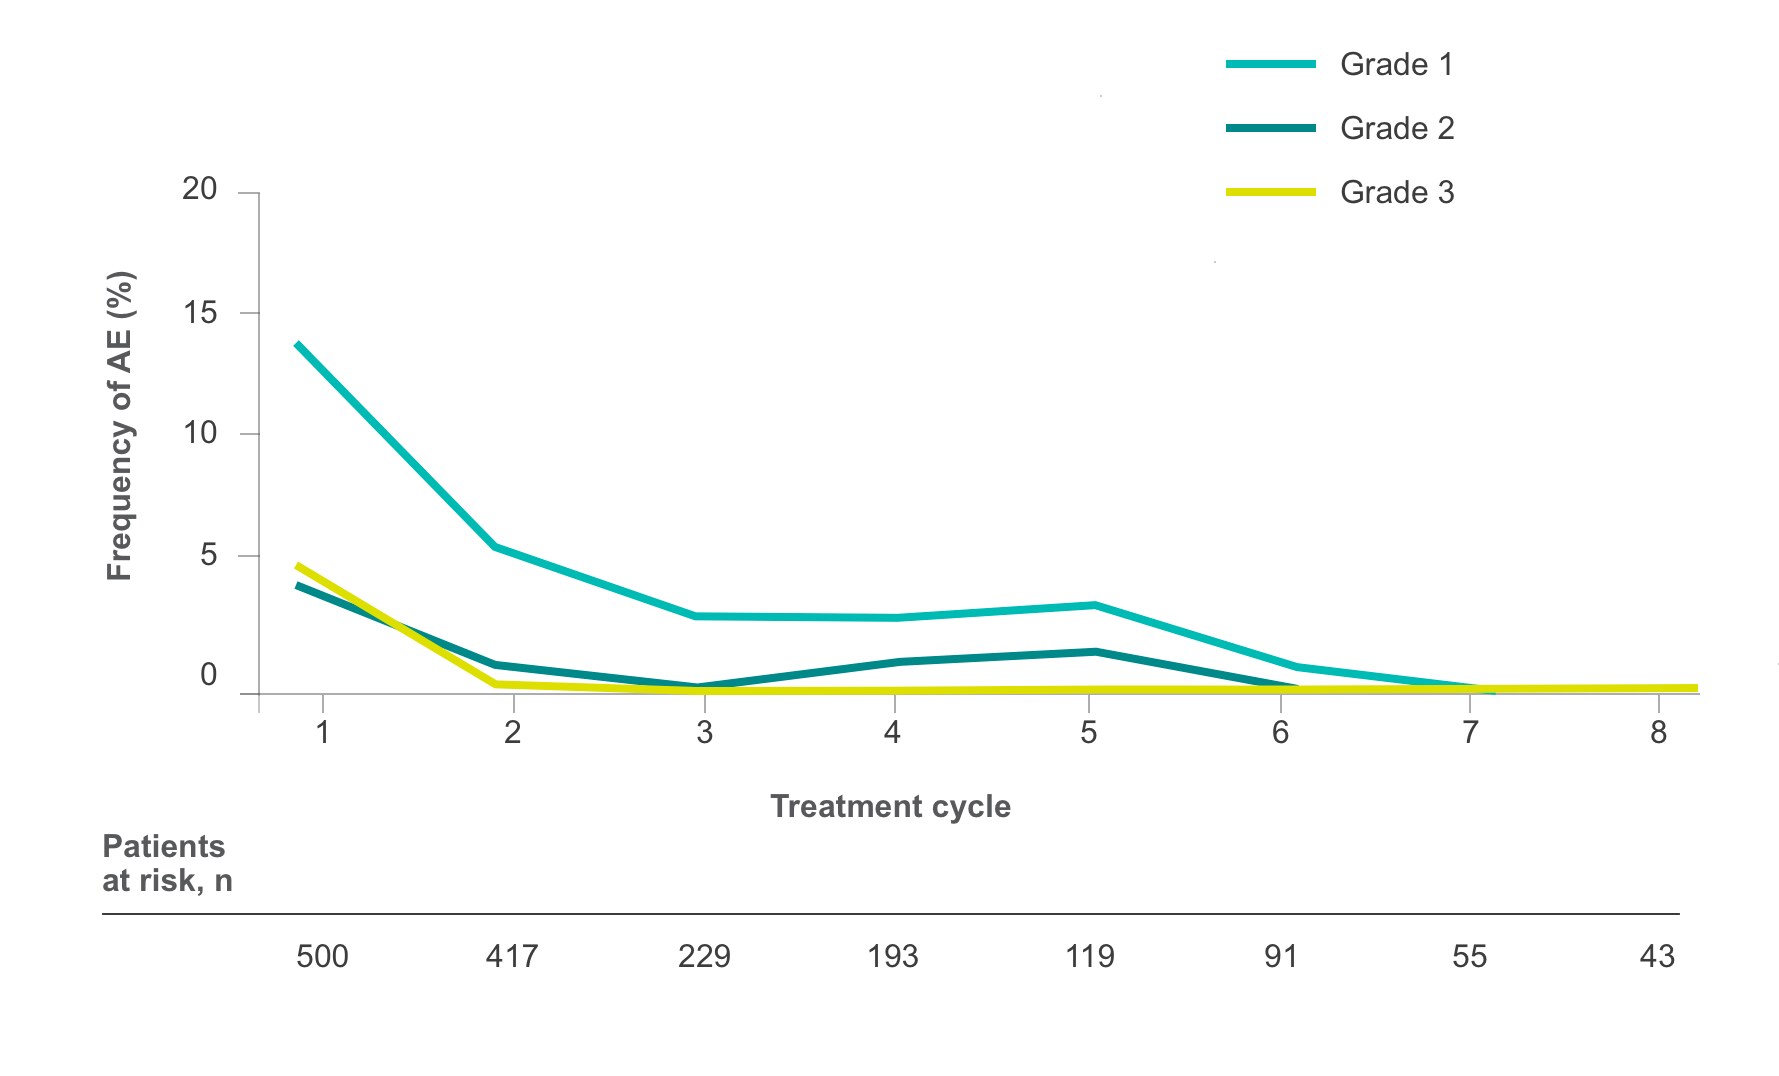 Line graph shows frequency levels of rash/desquamation as a side effect in STIVARGA® (regorafenib) patients.